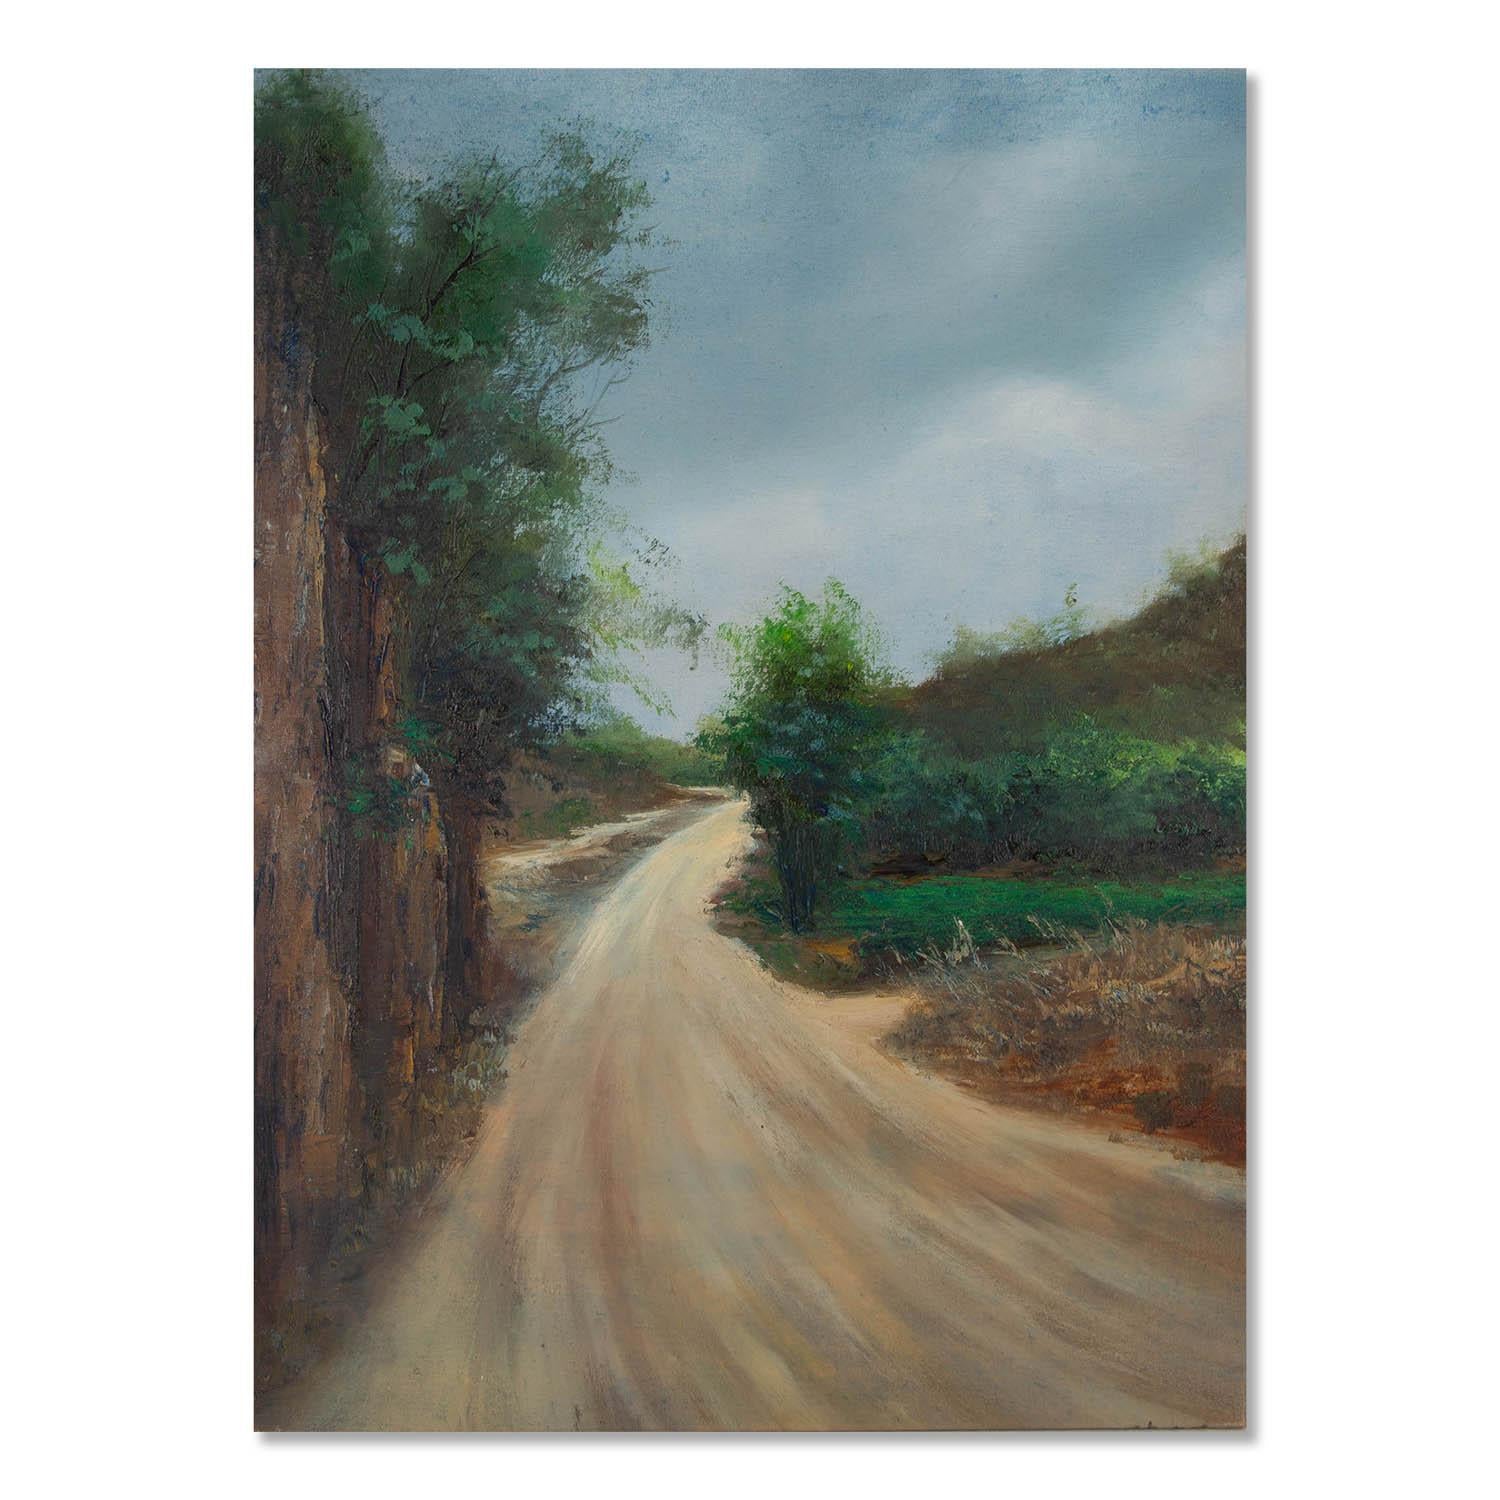  Title: Sketch-Small Path
 Medium: Oil on canvas
 Size: 30 x 22 inches
 Frame: Framing options available!
 Condition: The painting appears to be in excellent condition.
 
 Year: 2000 Circa
 Artist: Jianping Chen
 Signature: Signed
 Signature